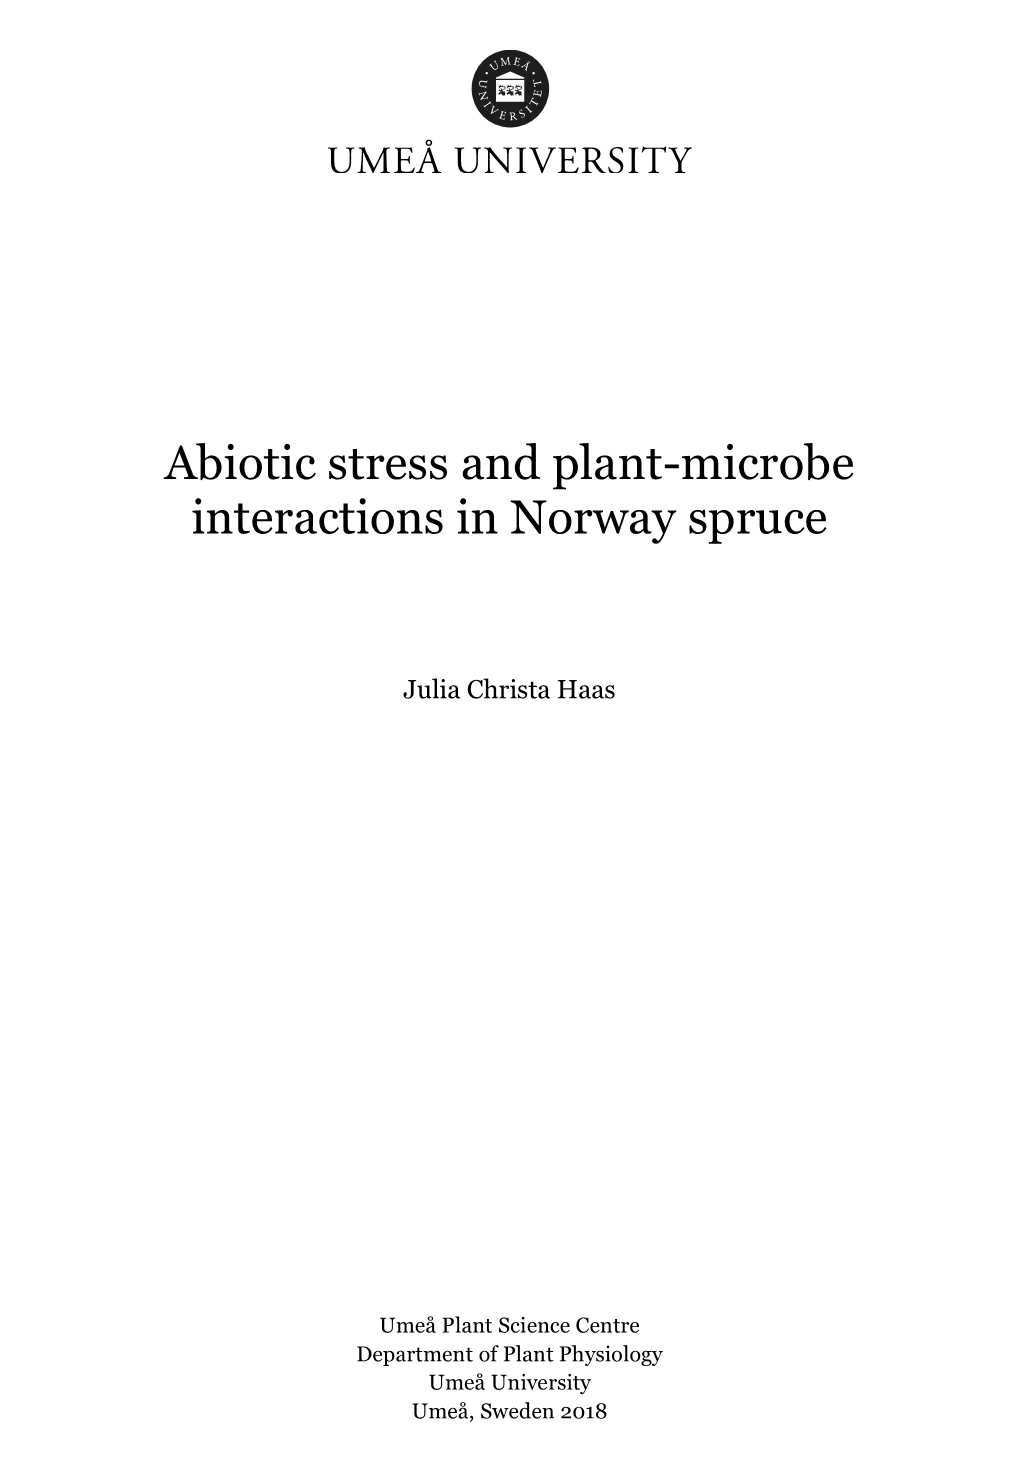 Abiotic Stress and Plant-Microbe Interactions in Norway Spruce